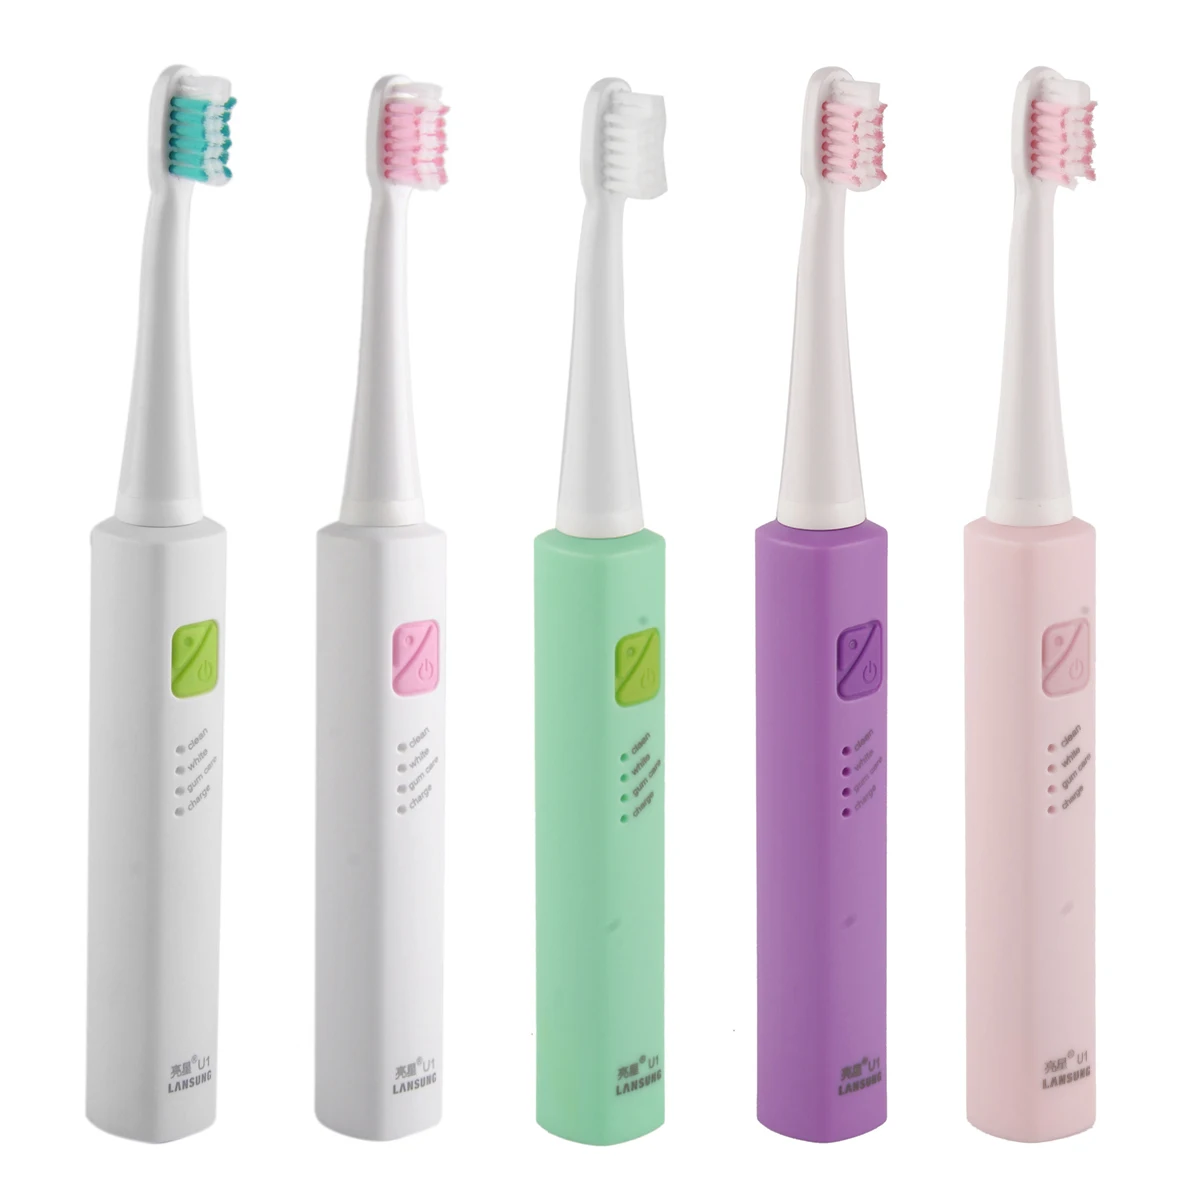 

LANSUNG UlTrasonic Sonic Electric Toothbrush Rechargeable Tooth Brushes With 4 Pcs Replacement Heads U1